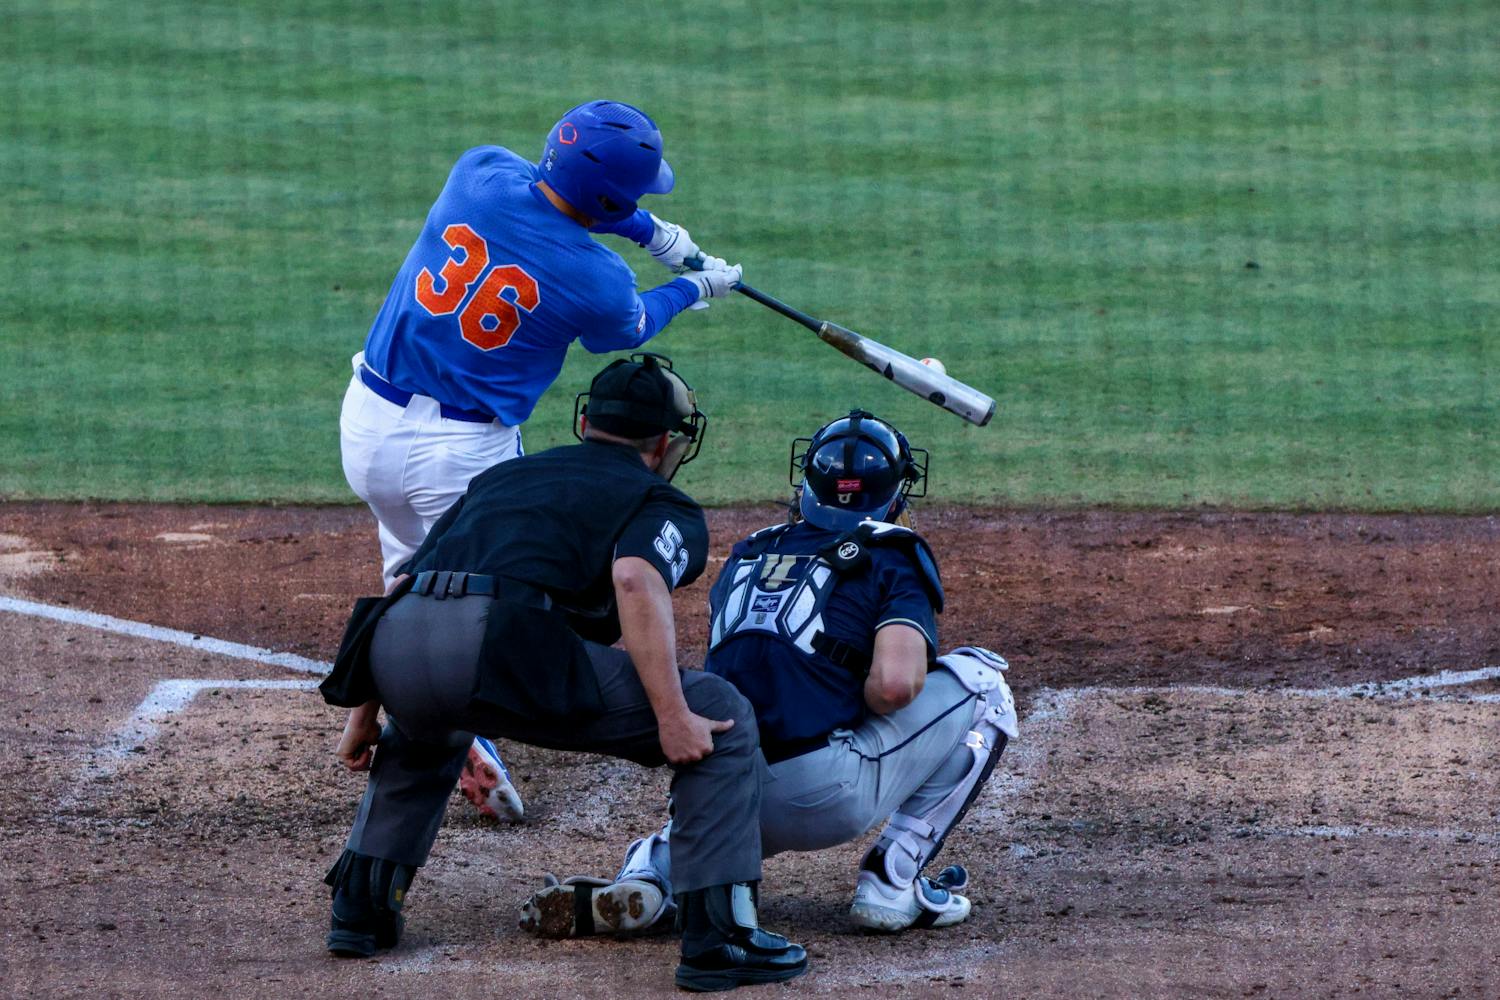 Florida left fielder Wyatt Langford hits the ball in the Gators' 16-2 win against the Charleston Southern Buccaneers Saturday, Feb. 18